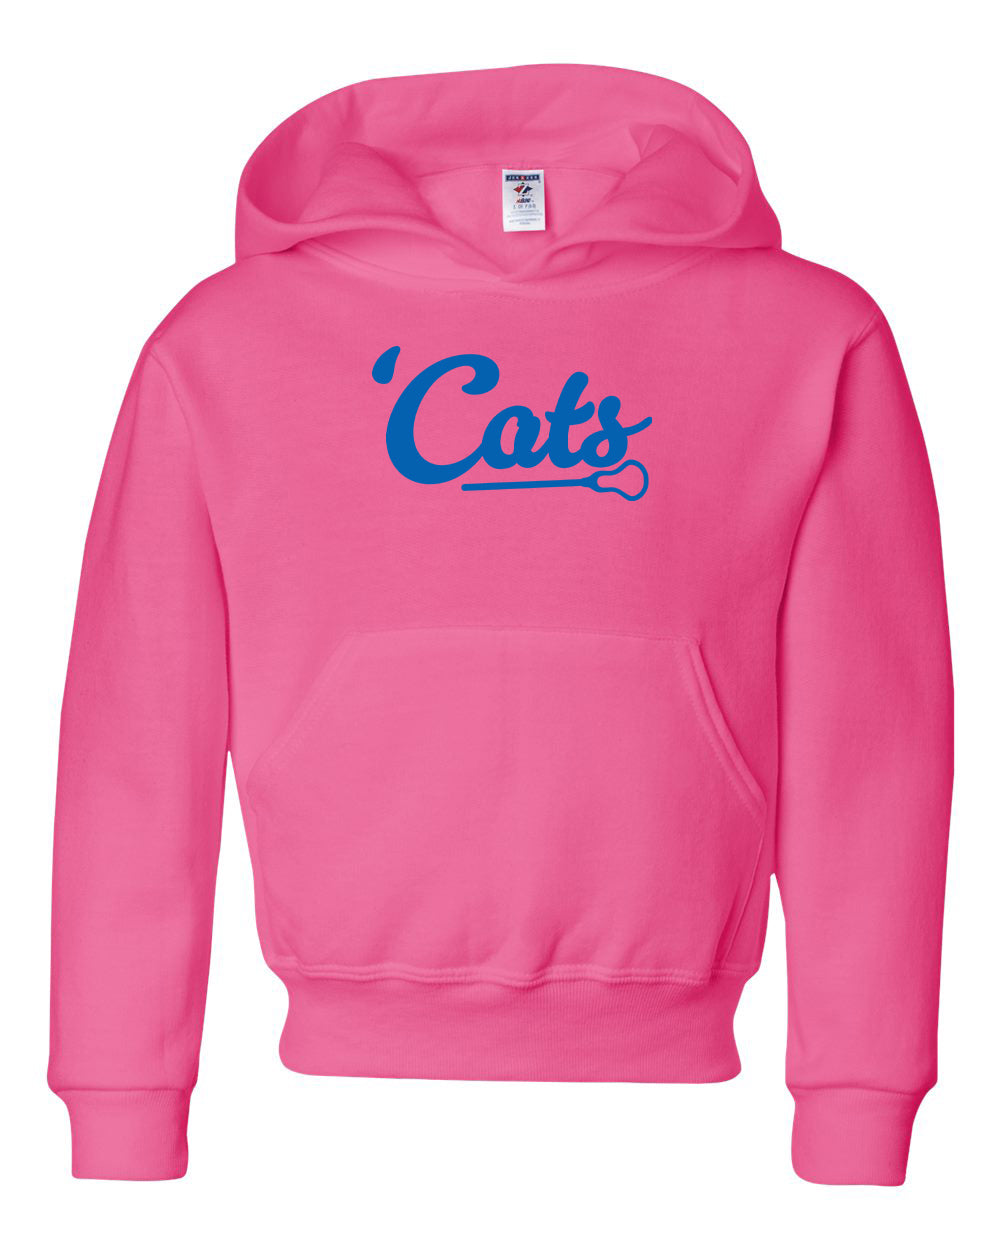 Suffield High Lacrosse - Youth Hoodie "Cats/Stick" - 996YR (color options available)